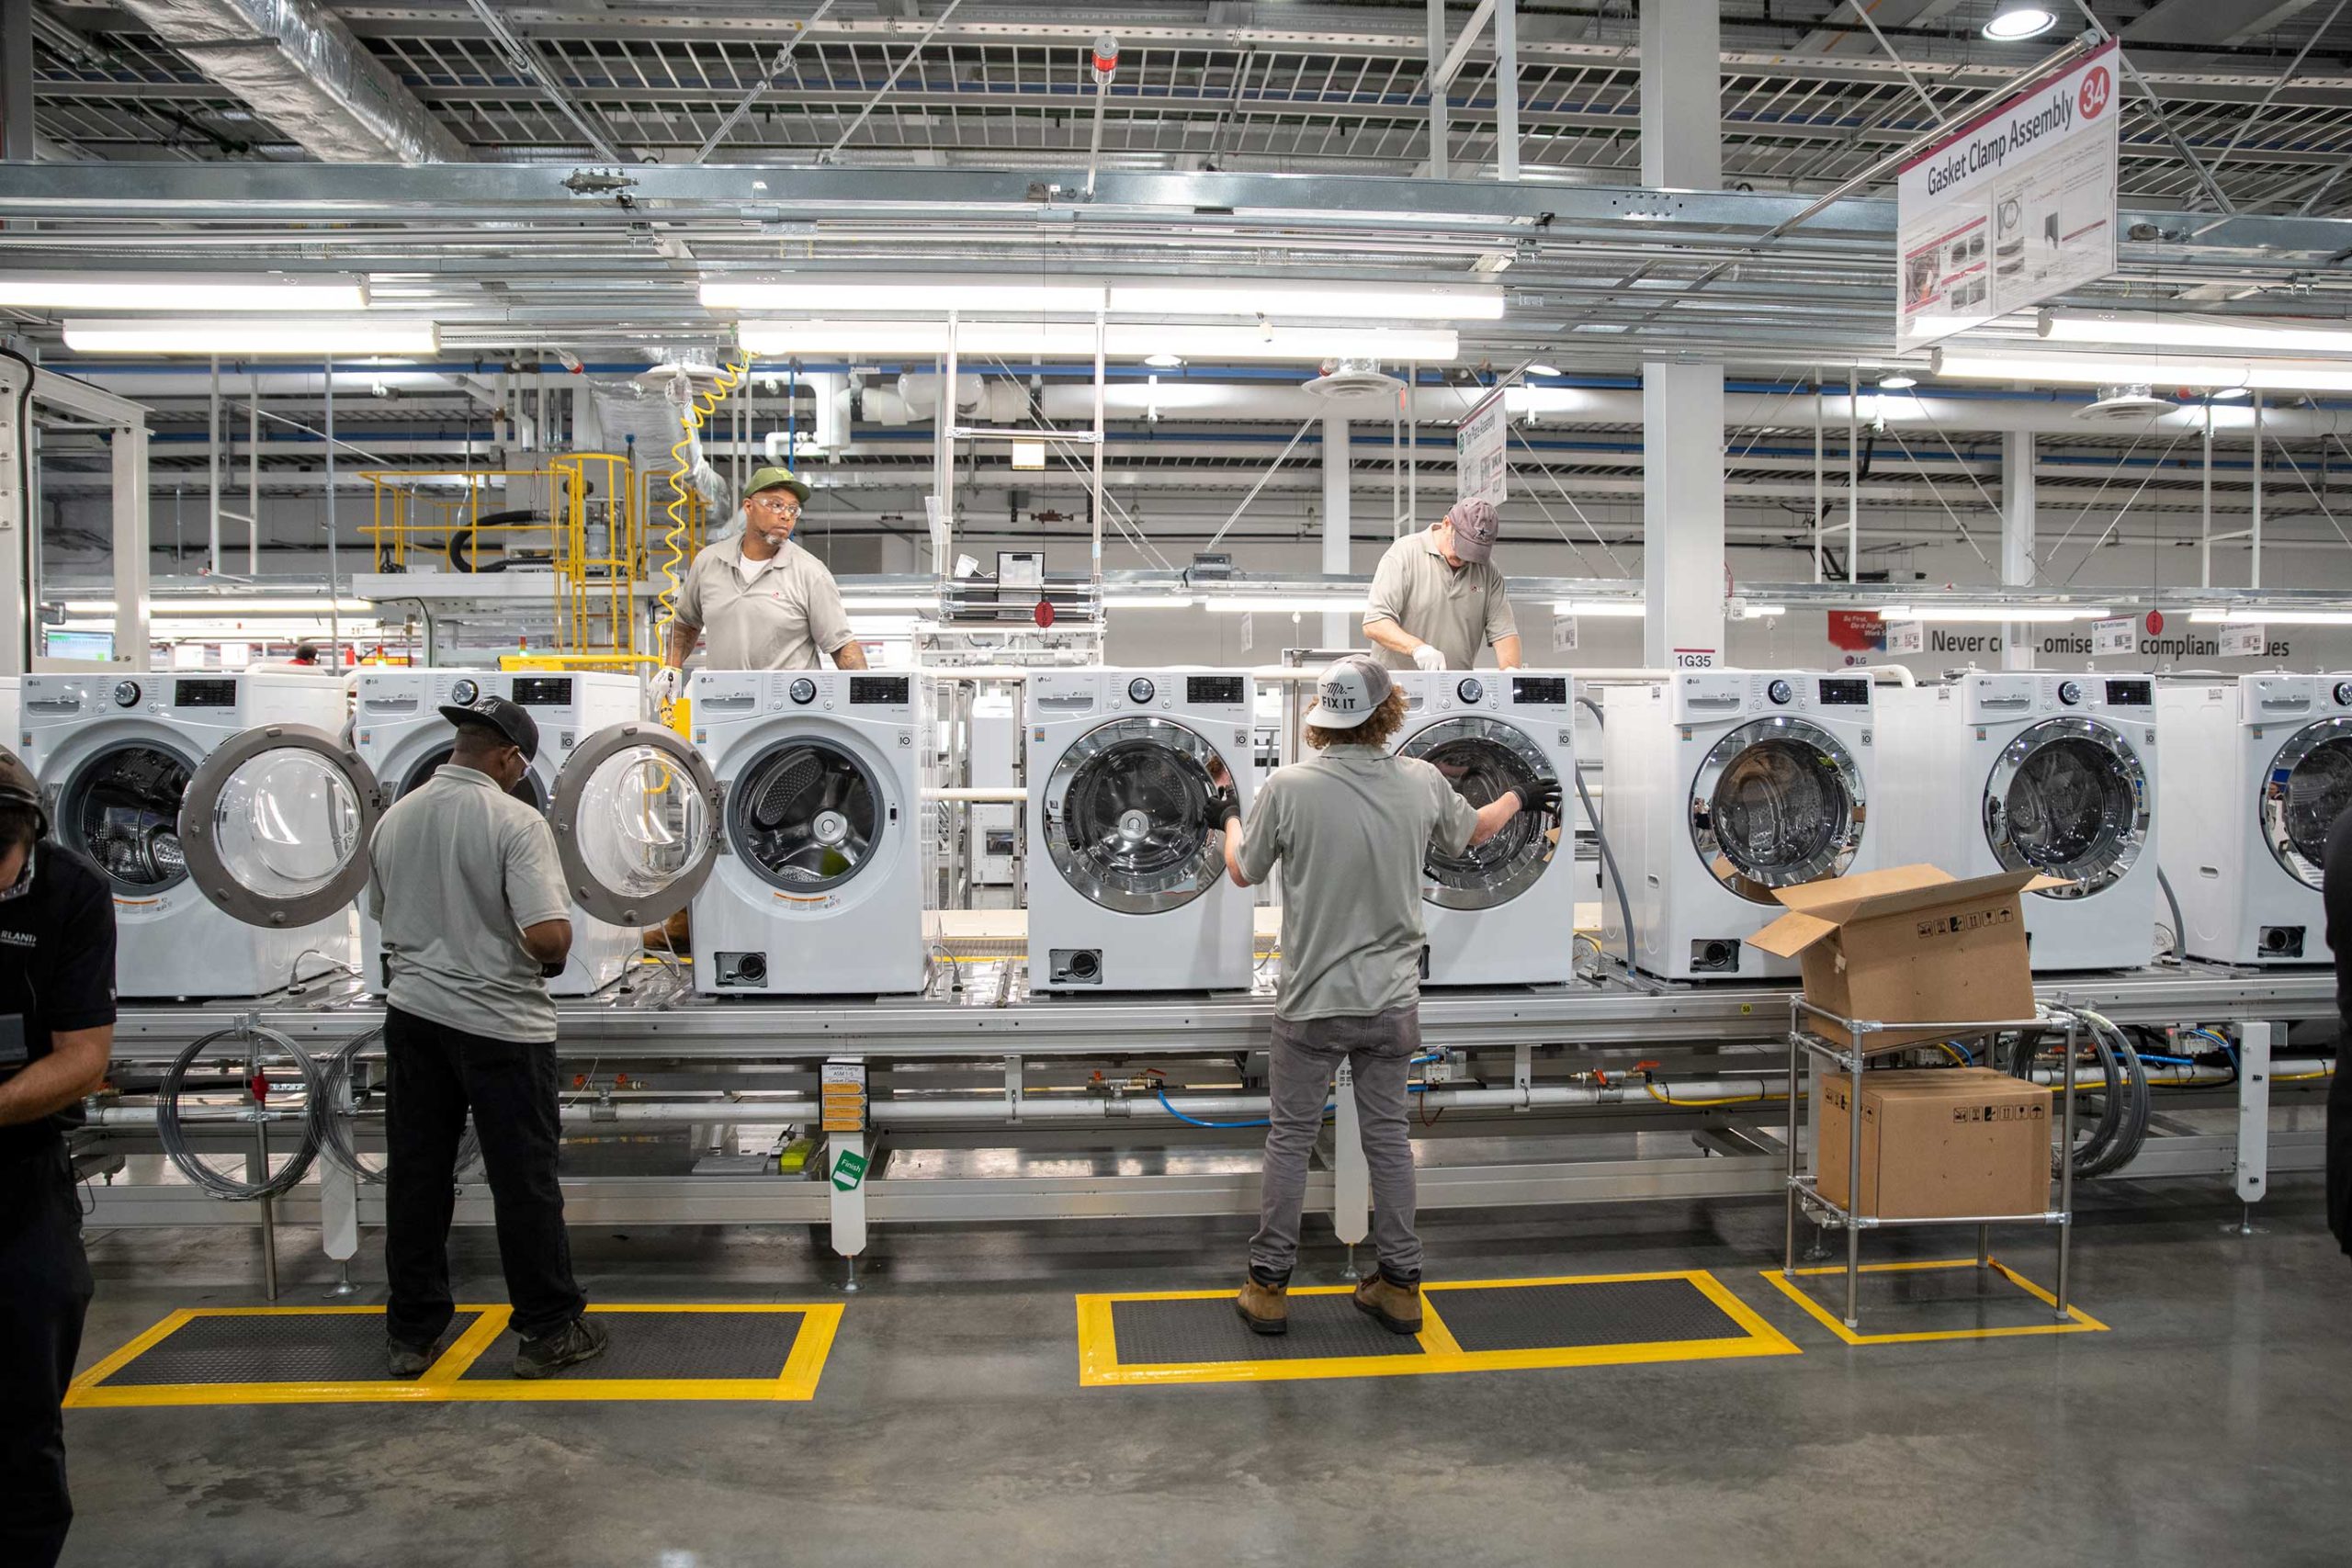 Residential Appliance Production Facility assembly line